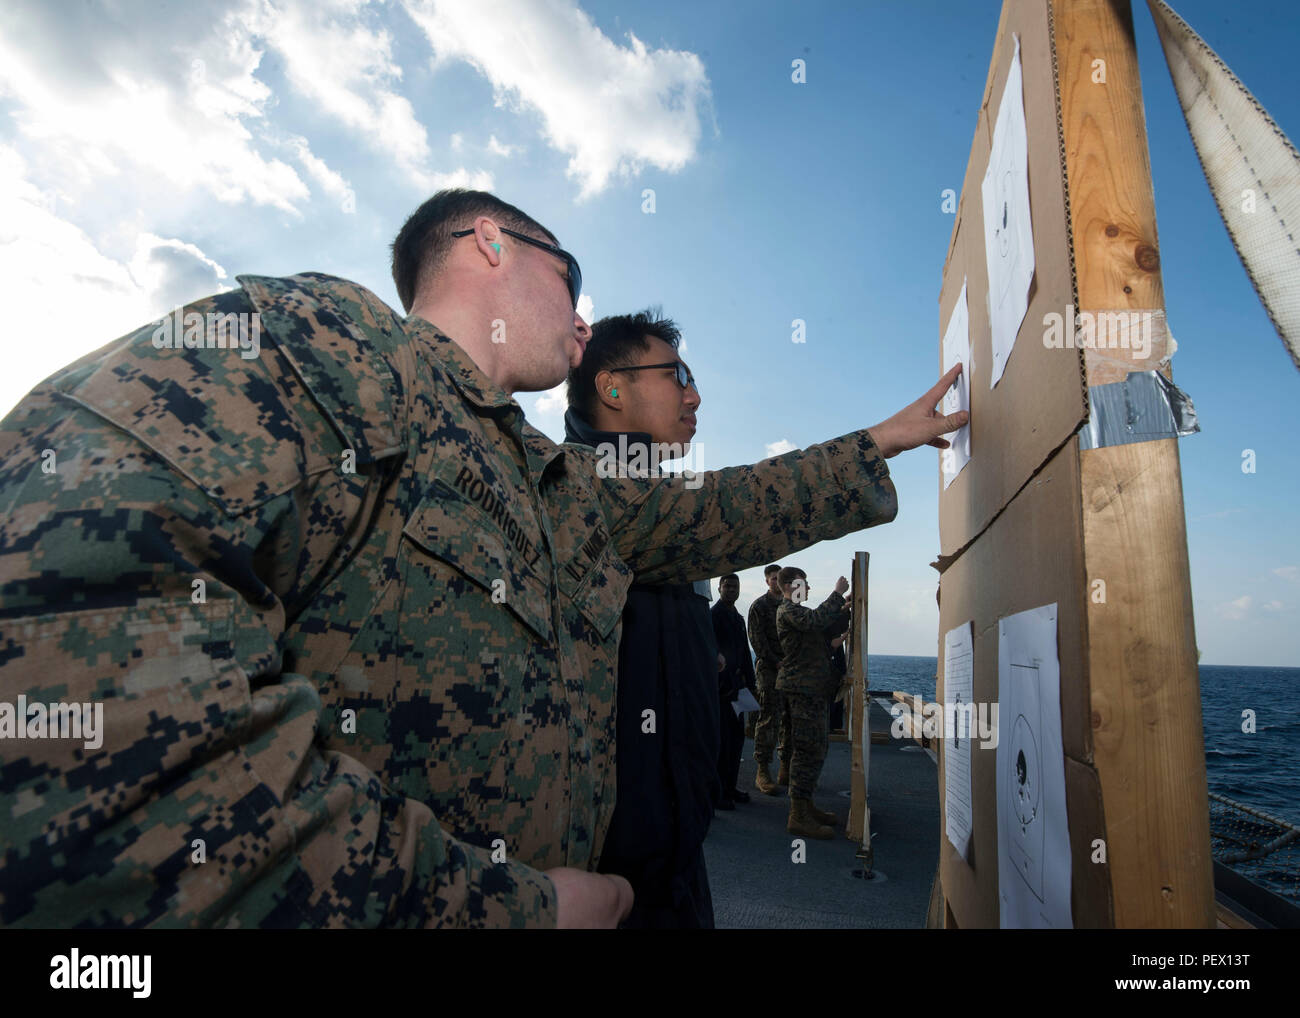 EASTERN COAST OKINAWA (Feb. 11, 2016) –Lance Cpl. Kenneth Rodriguez, left, assigned to the 31st Marine Expeditionary Unit (MEU), and Boatswain’s Mate 2nd Class Ian P. Sarreal tally a score sheet during a live-fire exercise on the flight deck of amphibious dock landing ship USS Germantown (LSD 42). Germantown is assigned to the Bonhomme Richard Amphibious Ready Group (ARG) and is participating in amphibious integration training (AIT) and a certification exercise (CERTEX) with the embarked 31st MEU. (U.S. Navy photo by Mass Communication Specialist 3rd Class James Vazquez/Released) Stock Photo